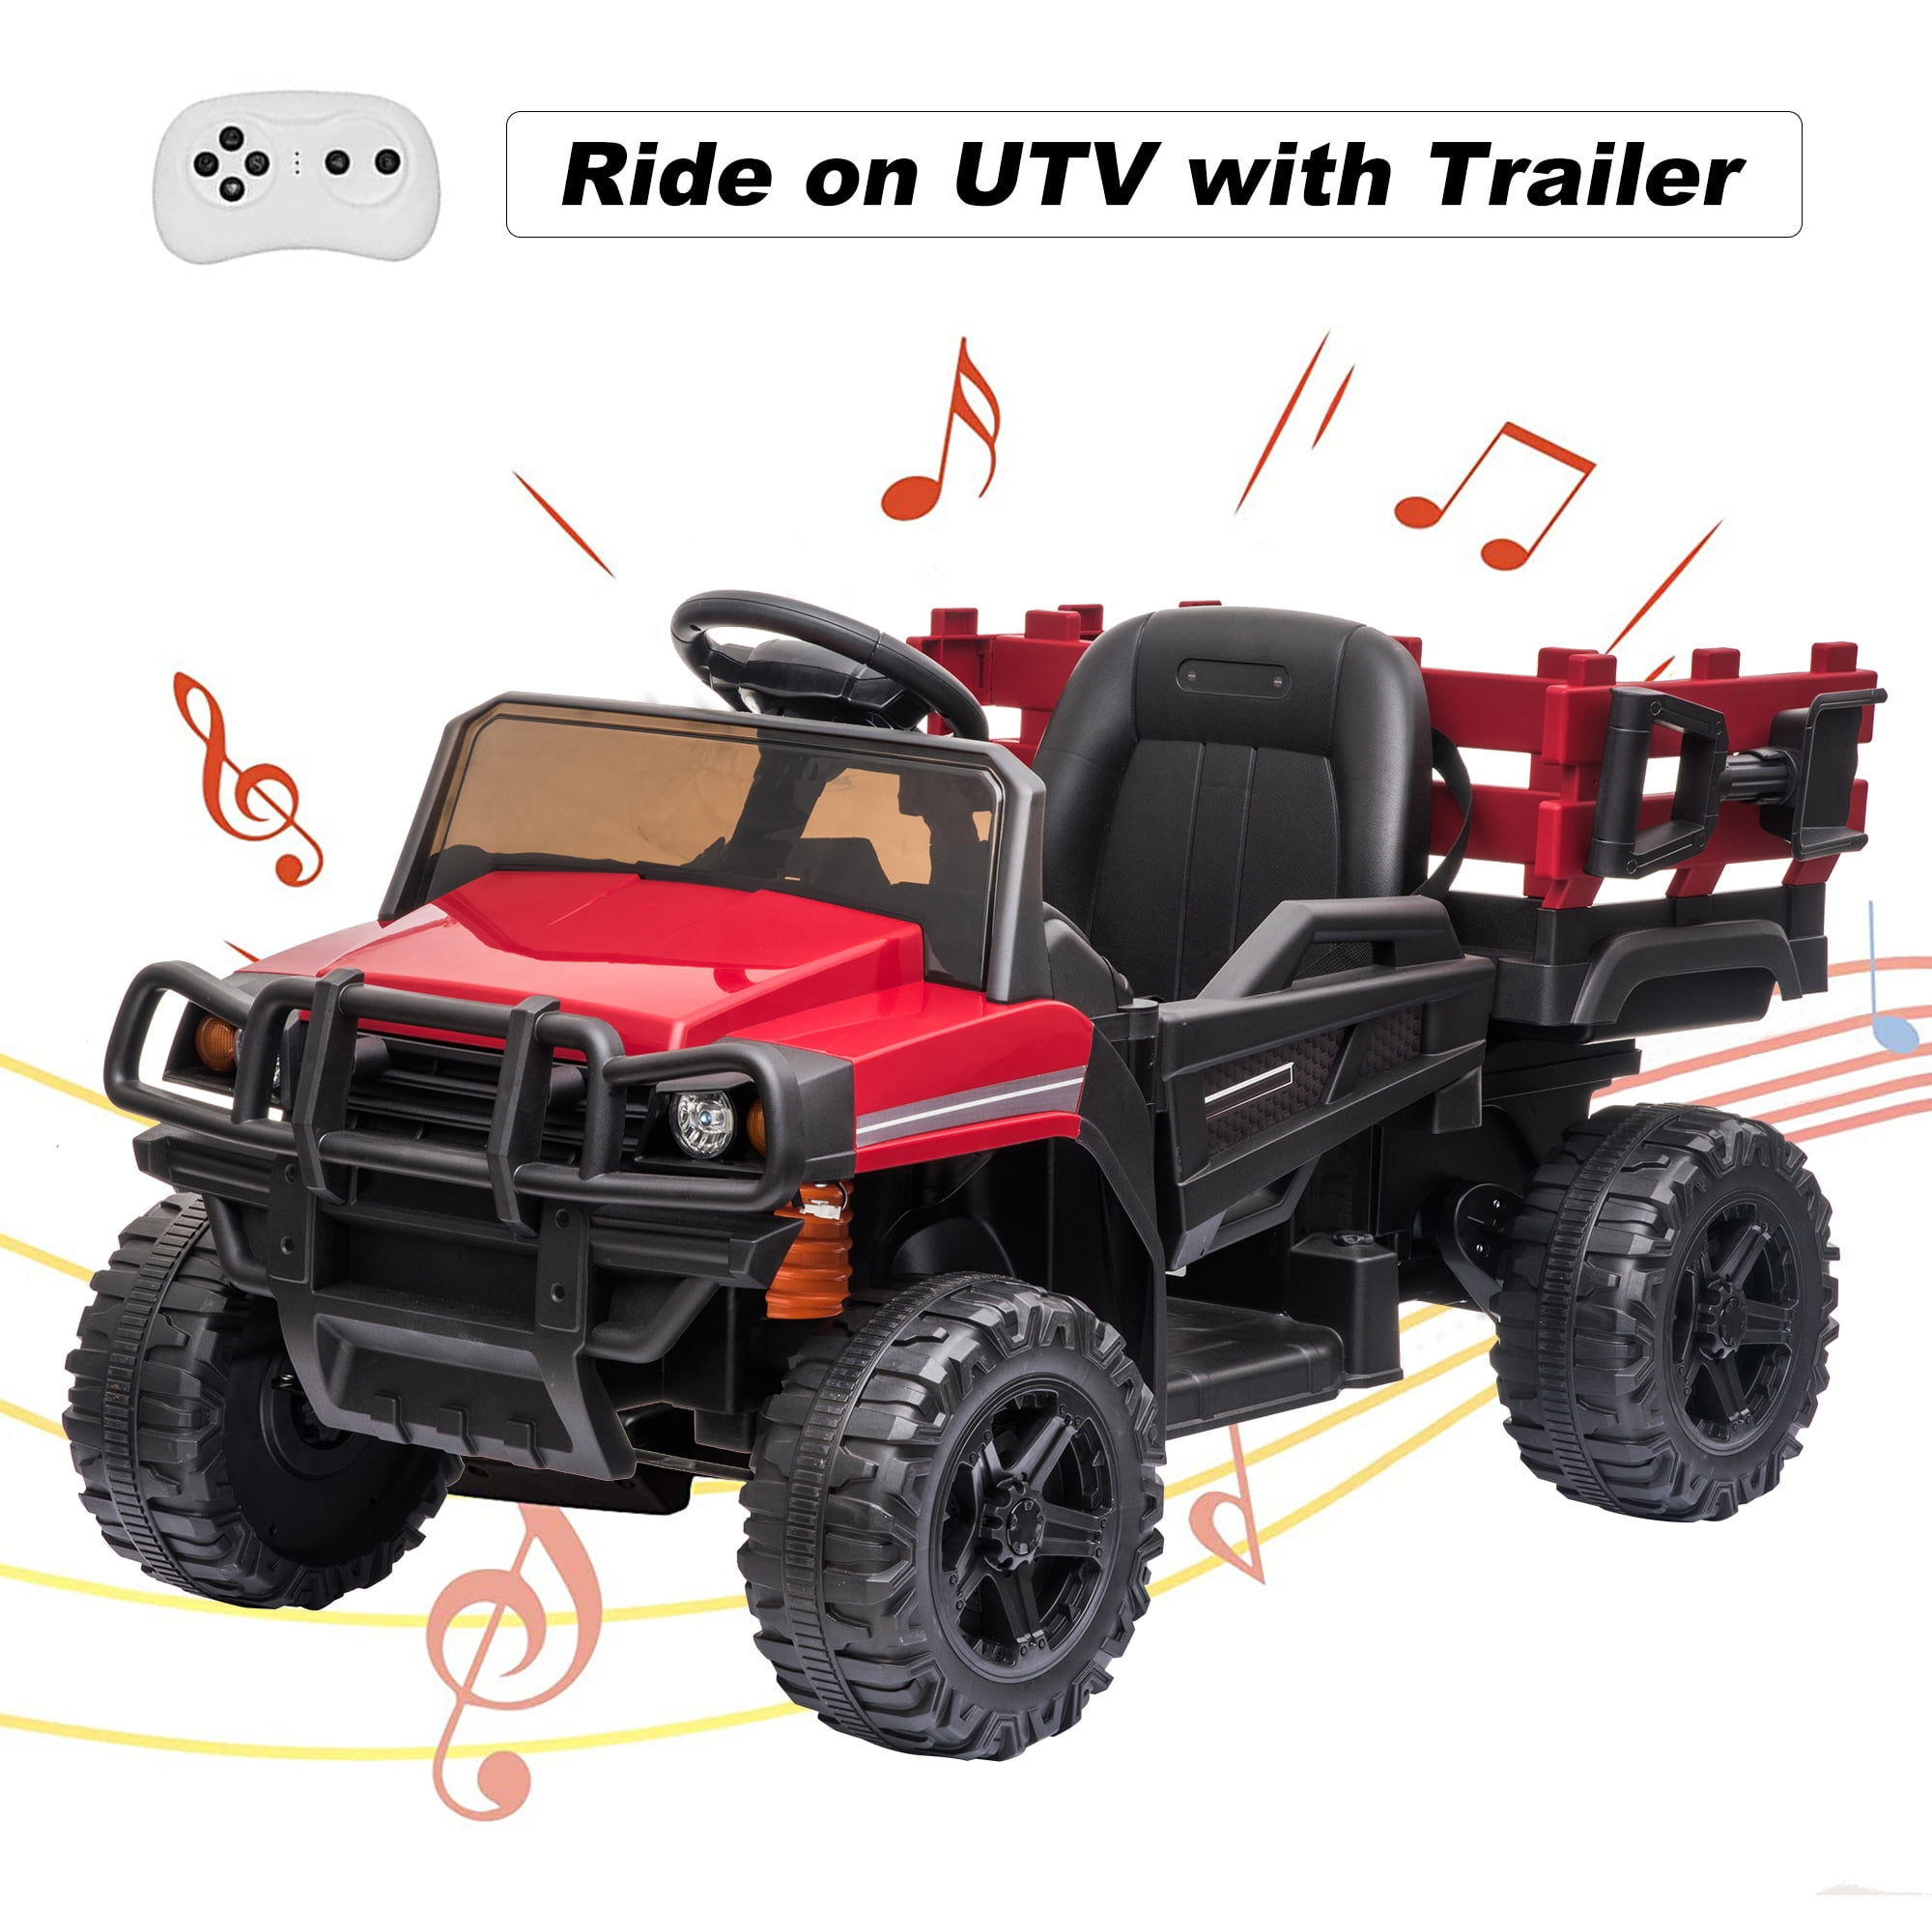 ASTM-F963/CPSIA 12V Kids Ride on Truck Off-road UTV for Varieties Roads in 2 Speeds 4 Spring Suspensions Music LED Lights Remote Control with Emergency Brake Button Rear-wheel Driving Mode 